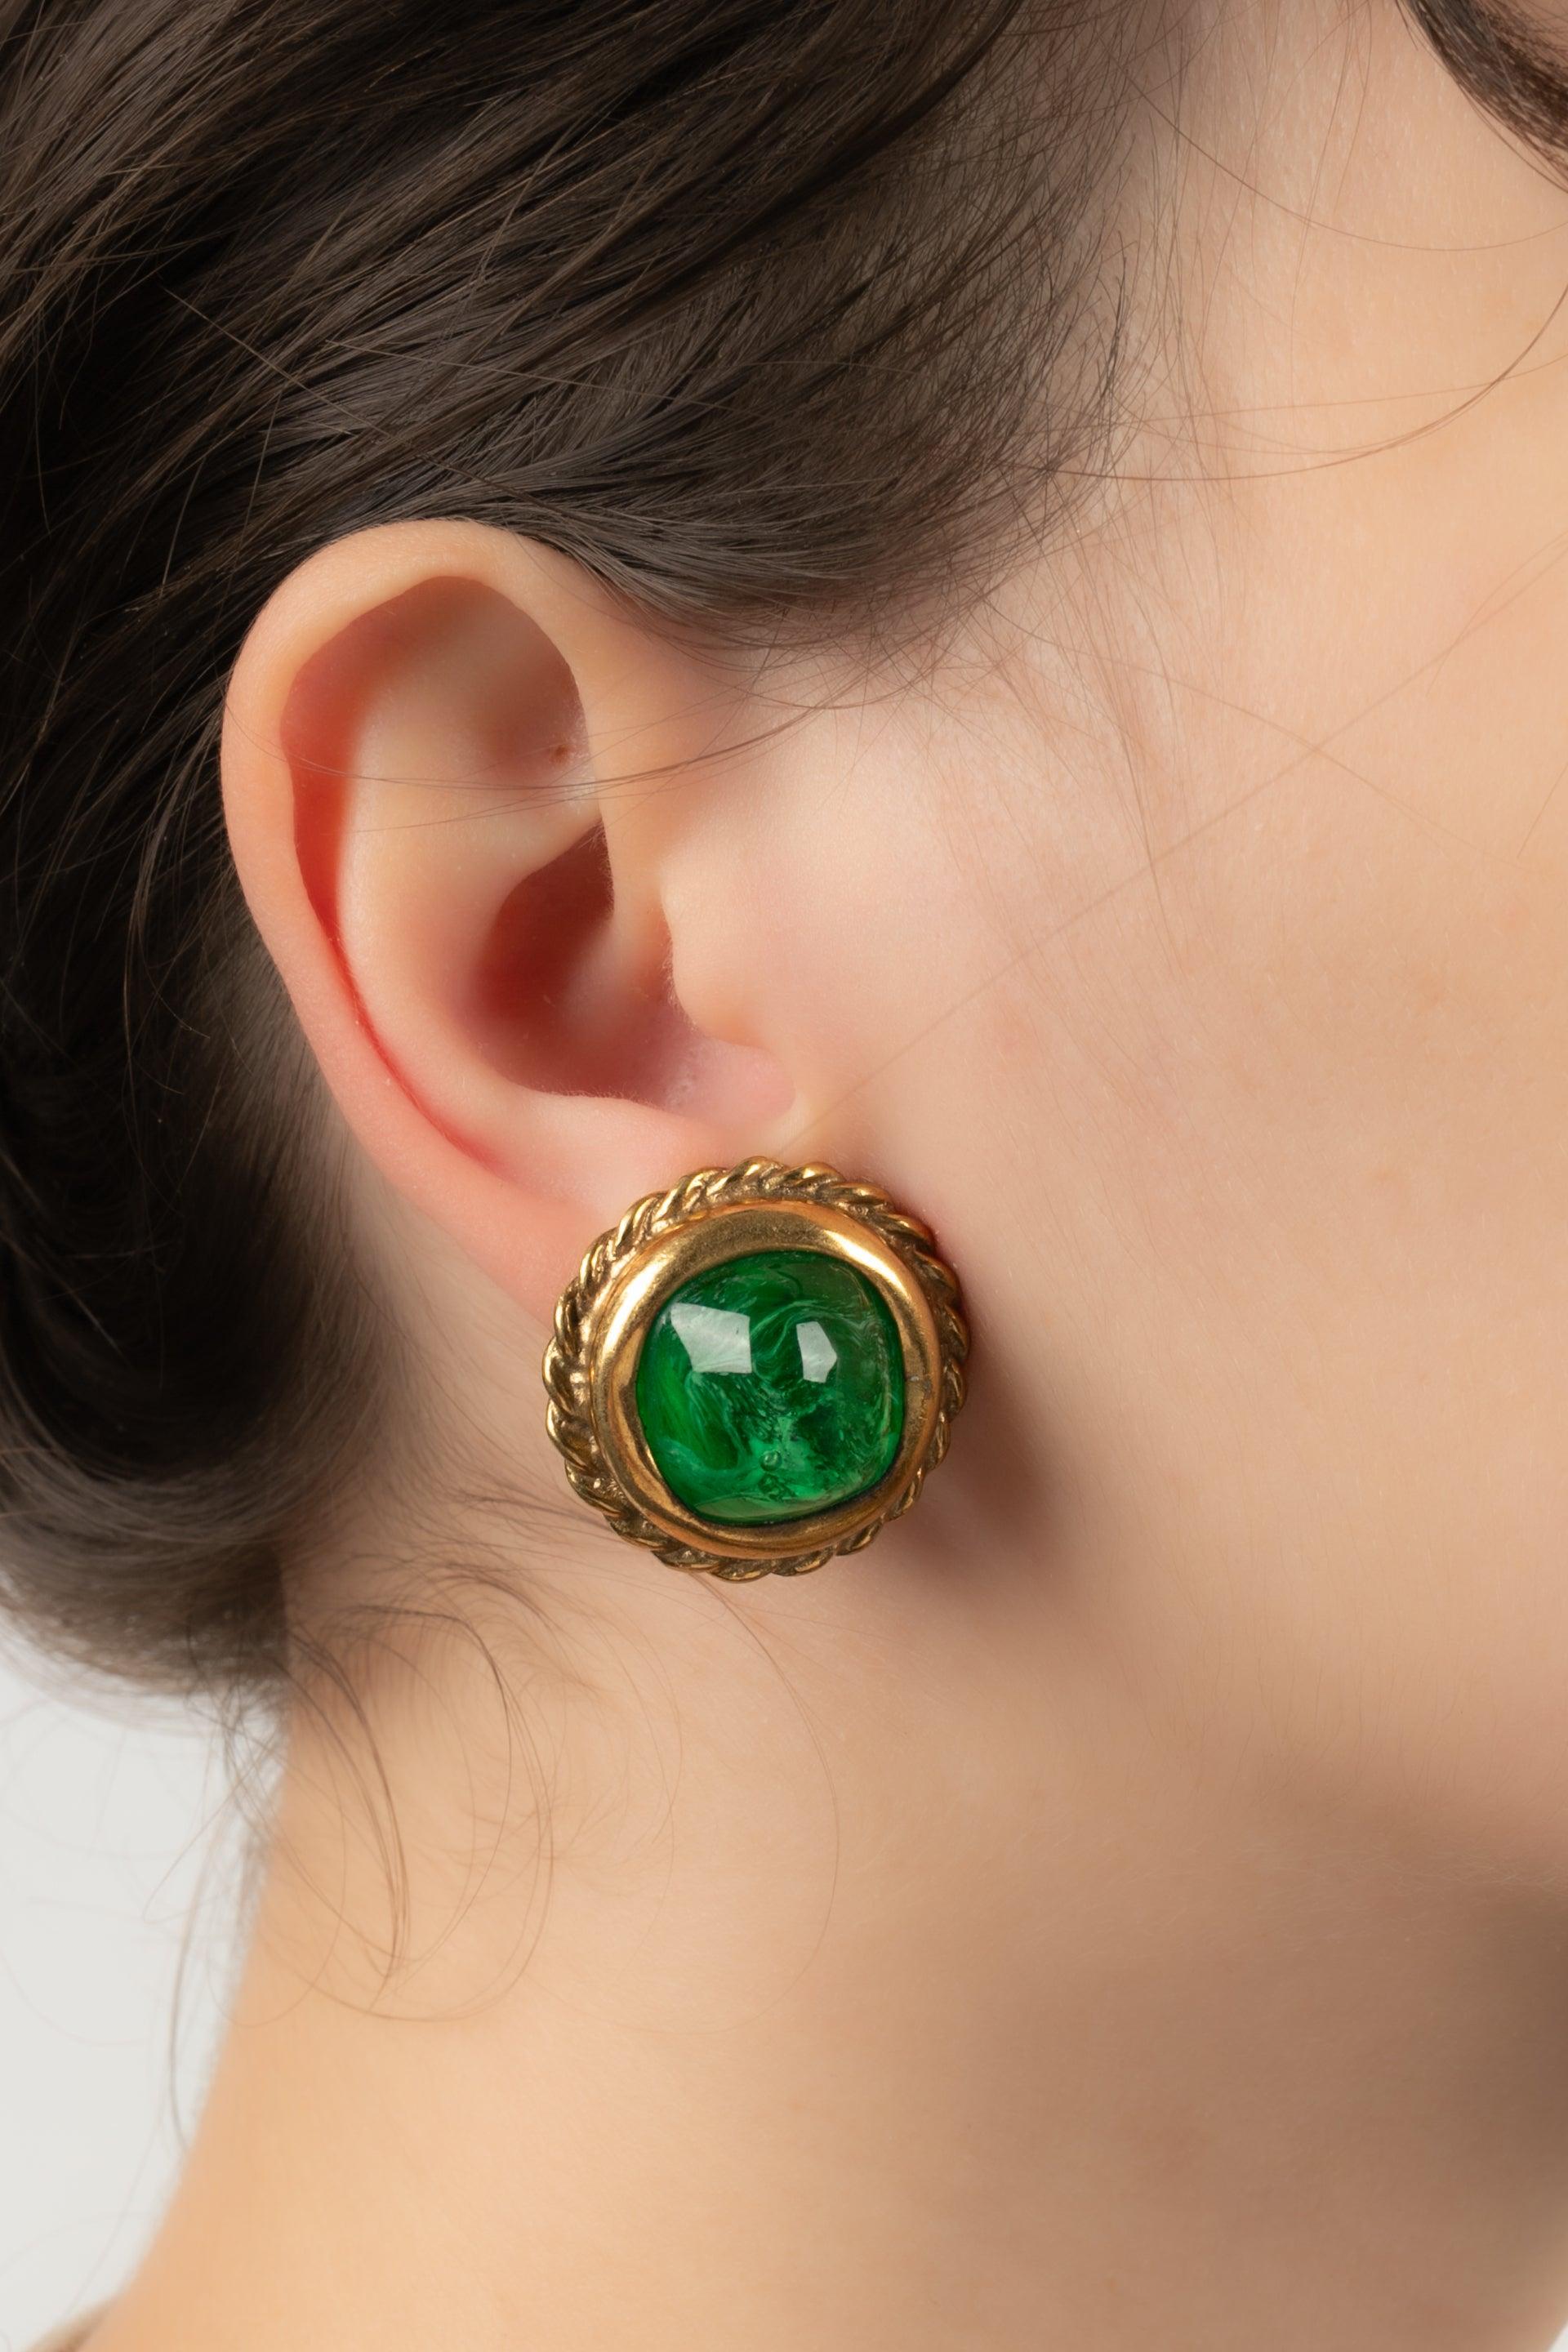 Chanel - Golden metal earrings with glass-paste cabochons.

Additional information:
Condition: Very good condition
Dimensions: Diameter: 2.5 cm

Seller Reference: BOB237